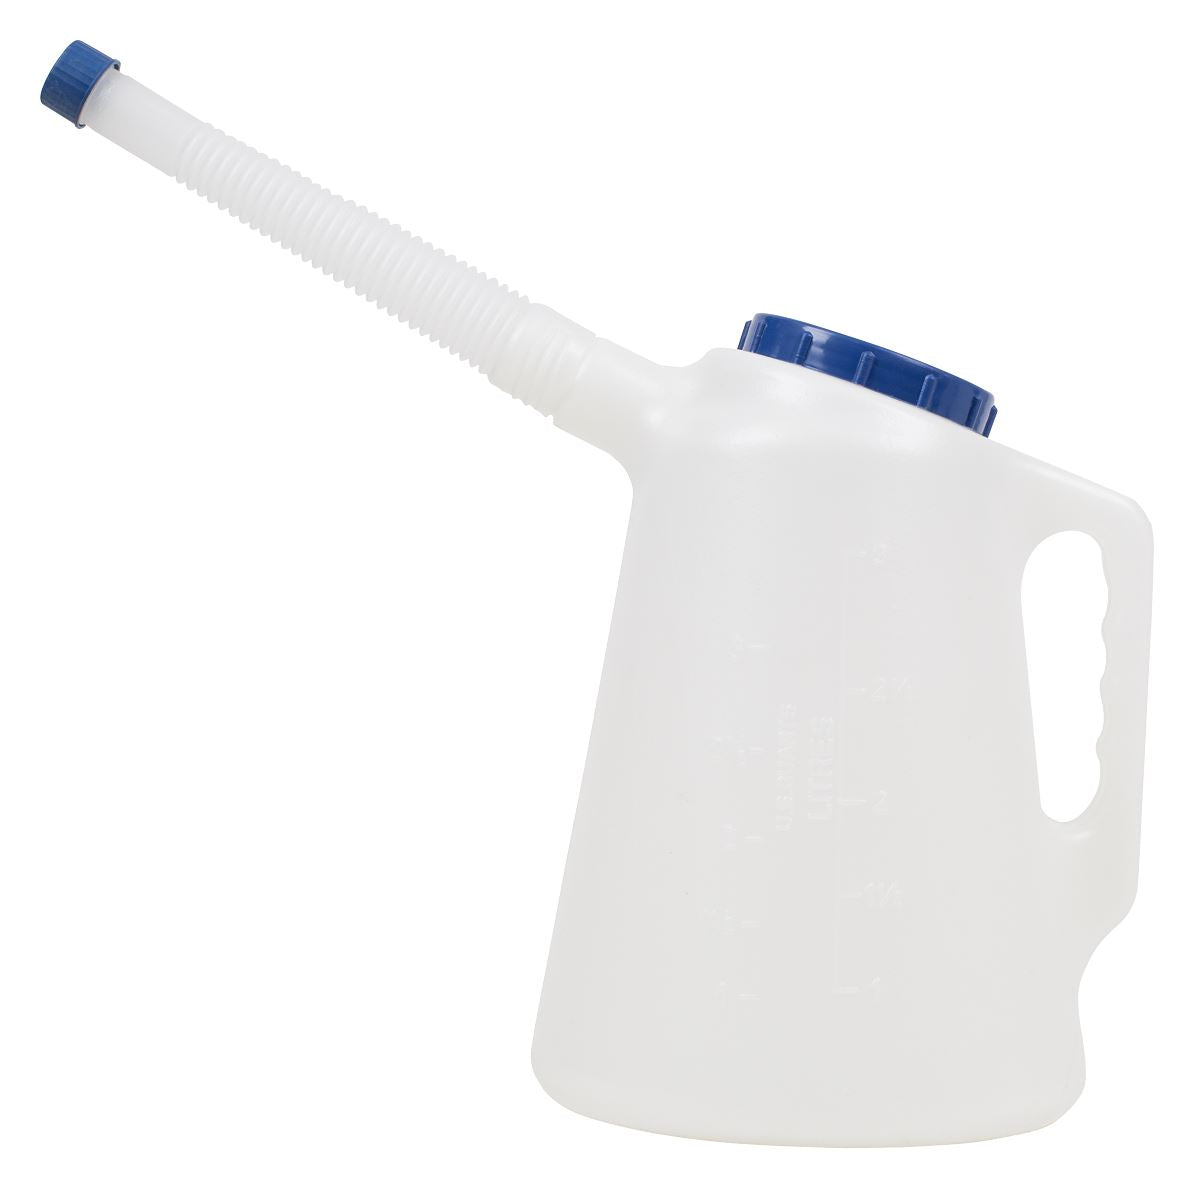 Sealey Oil Container with Flexible Spout 3L - Blue Lid